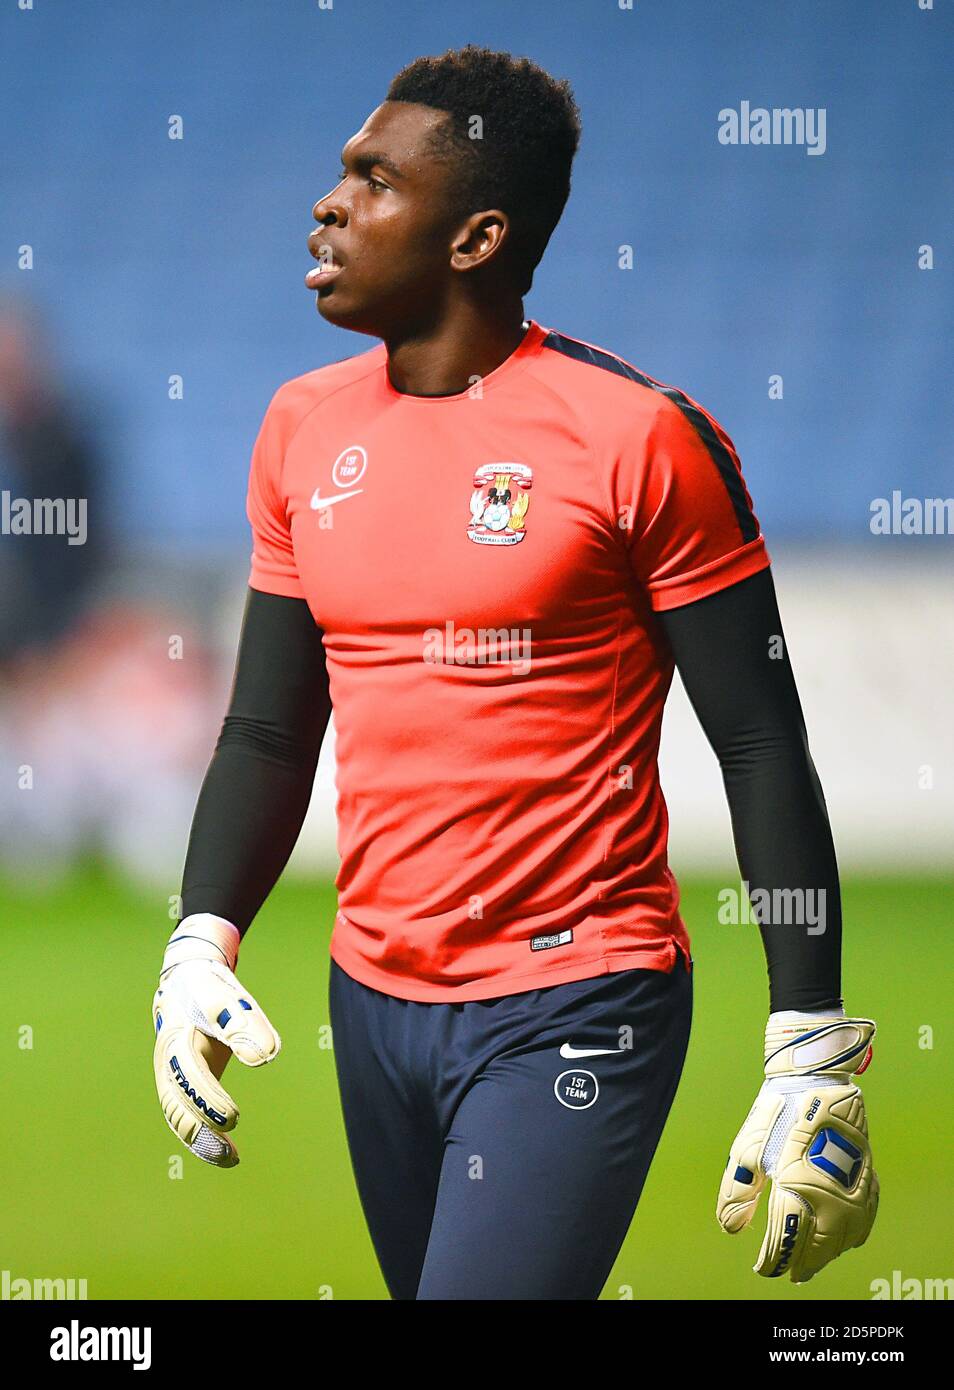 Coventry City goalkeeper Reice Charles-Cook warming up prior to the match.  Stock Photo